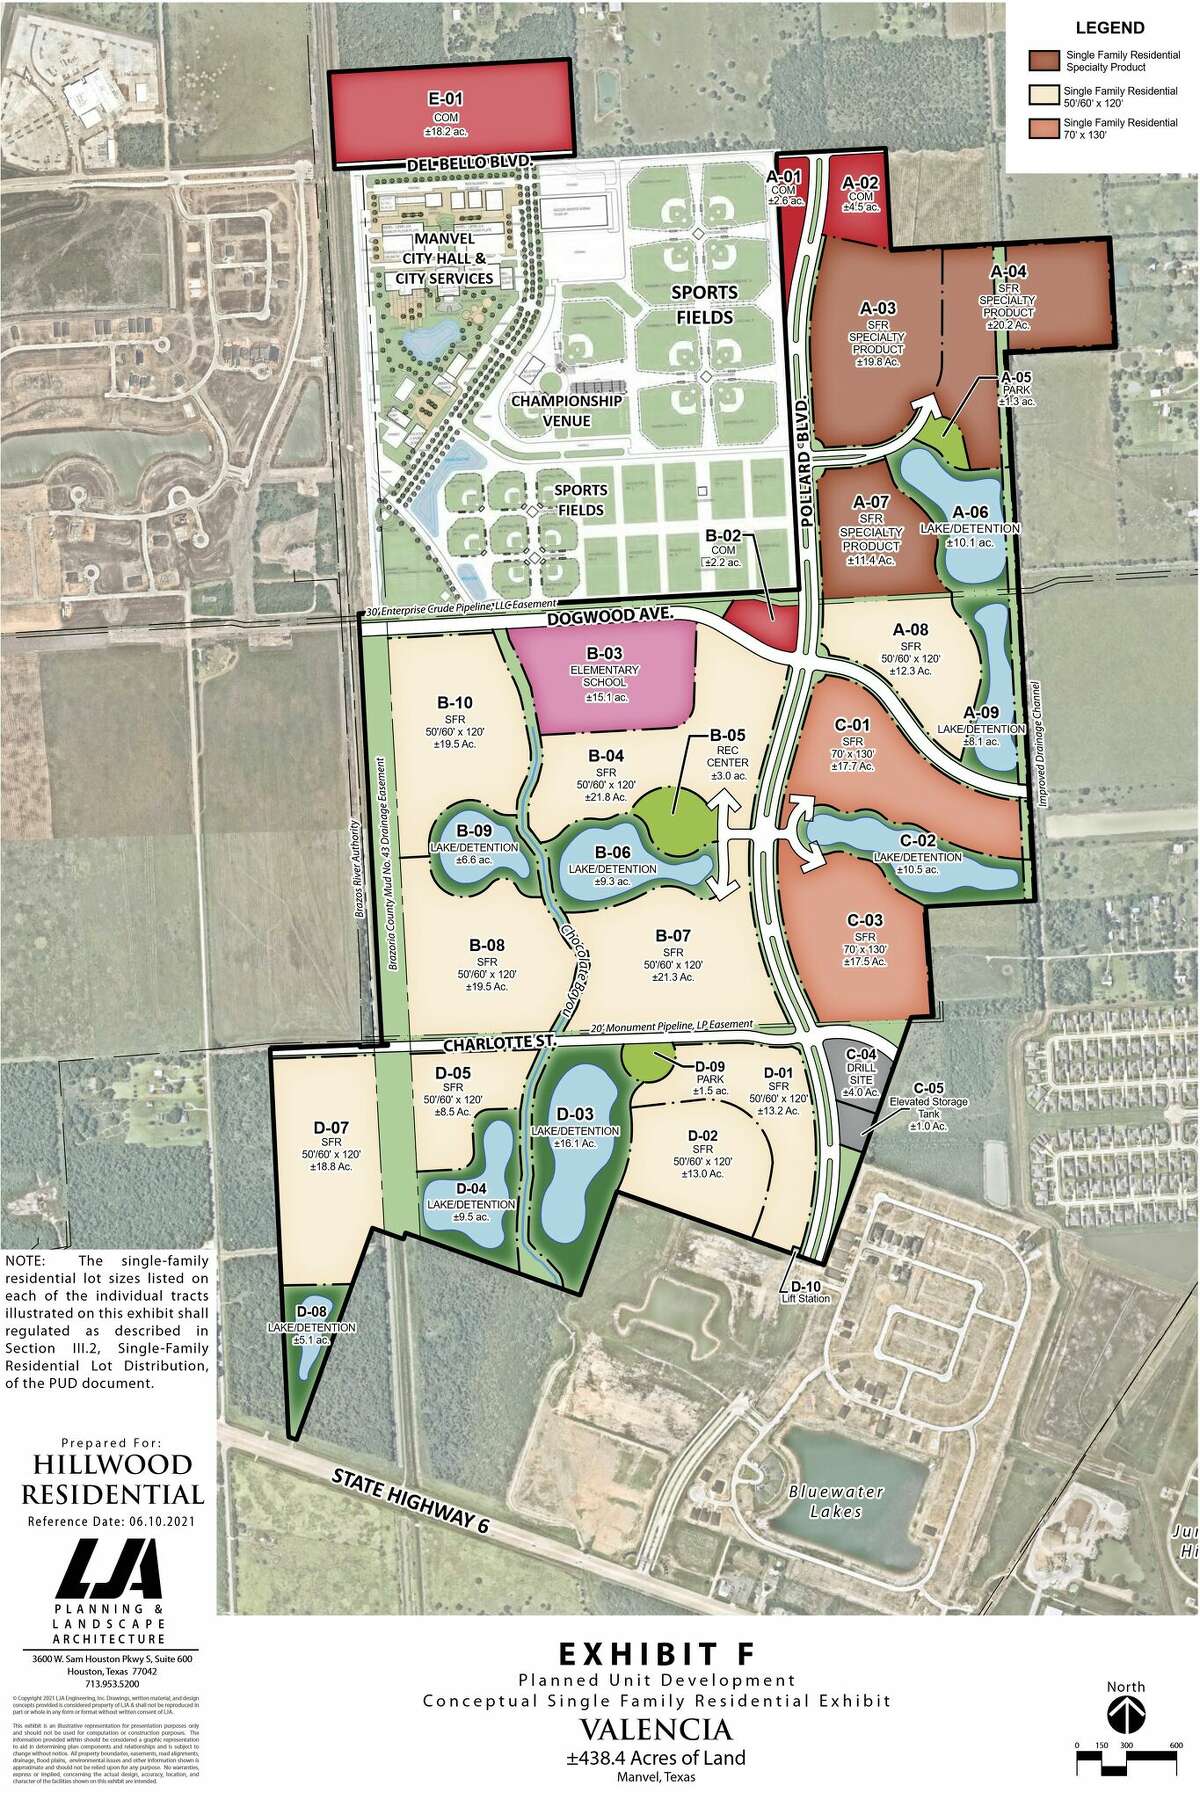 The 440-acre development project is expected to include roughly 950 homes and 30 acres of commercial property.